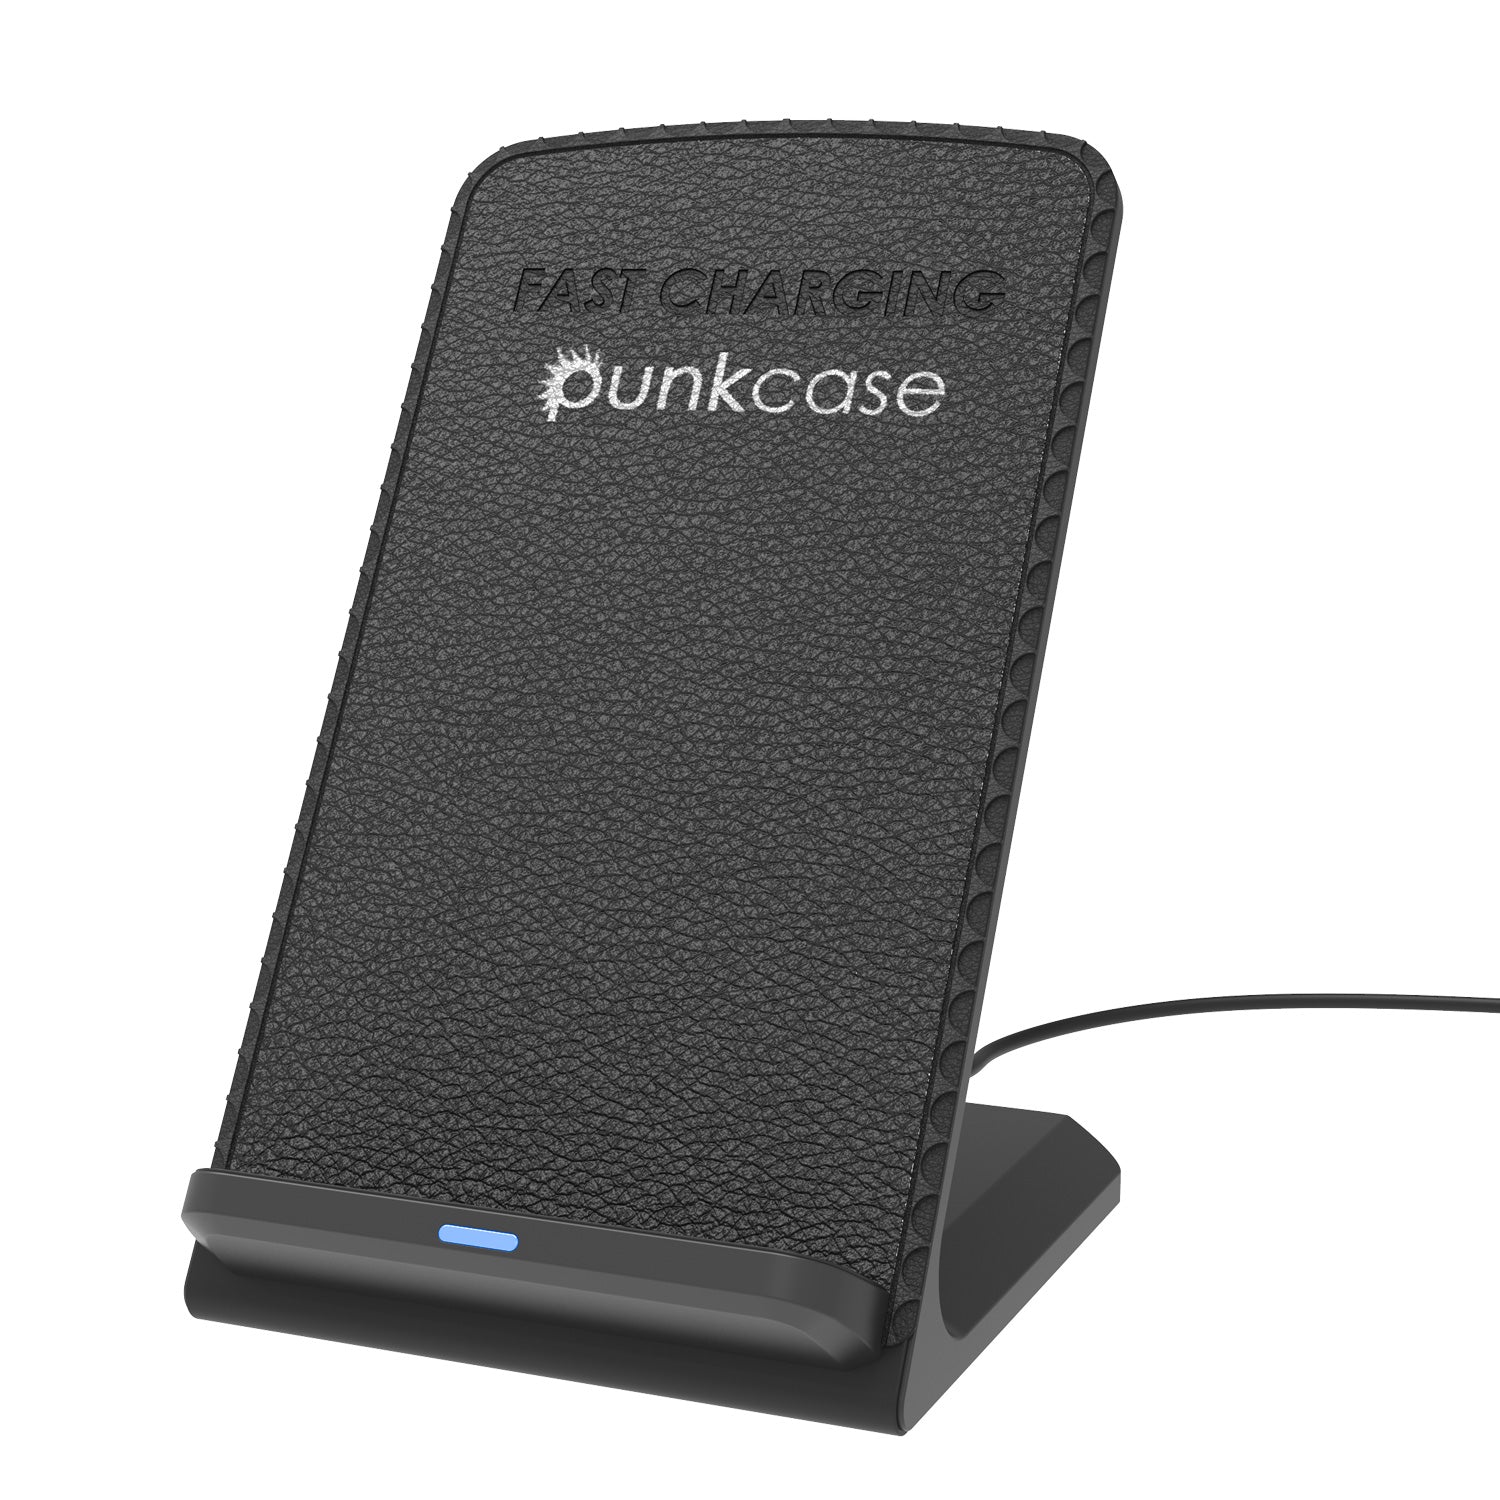 Punkcase Wireless Phone Charging Station (Color in image: Default Title)